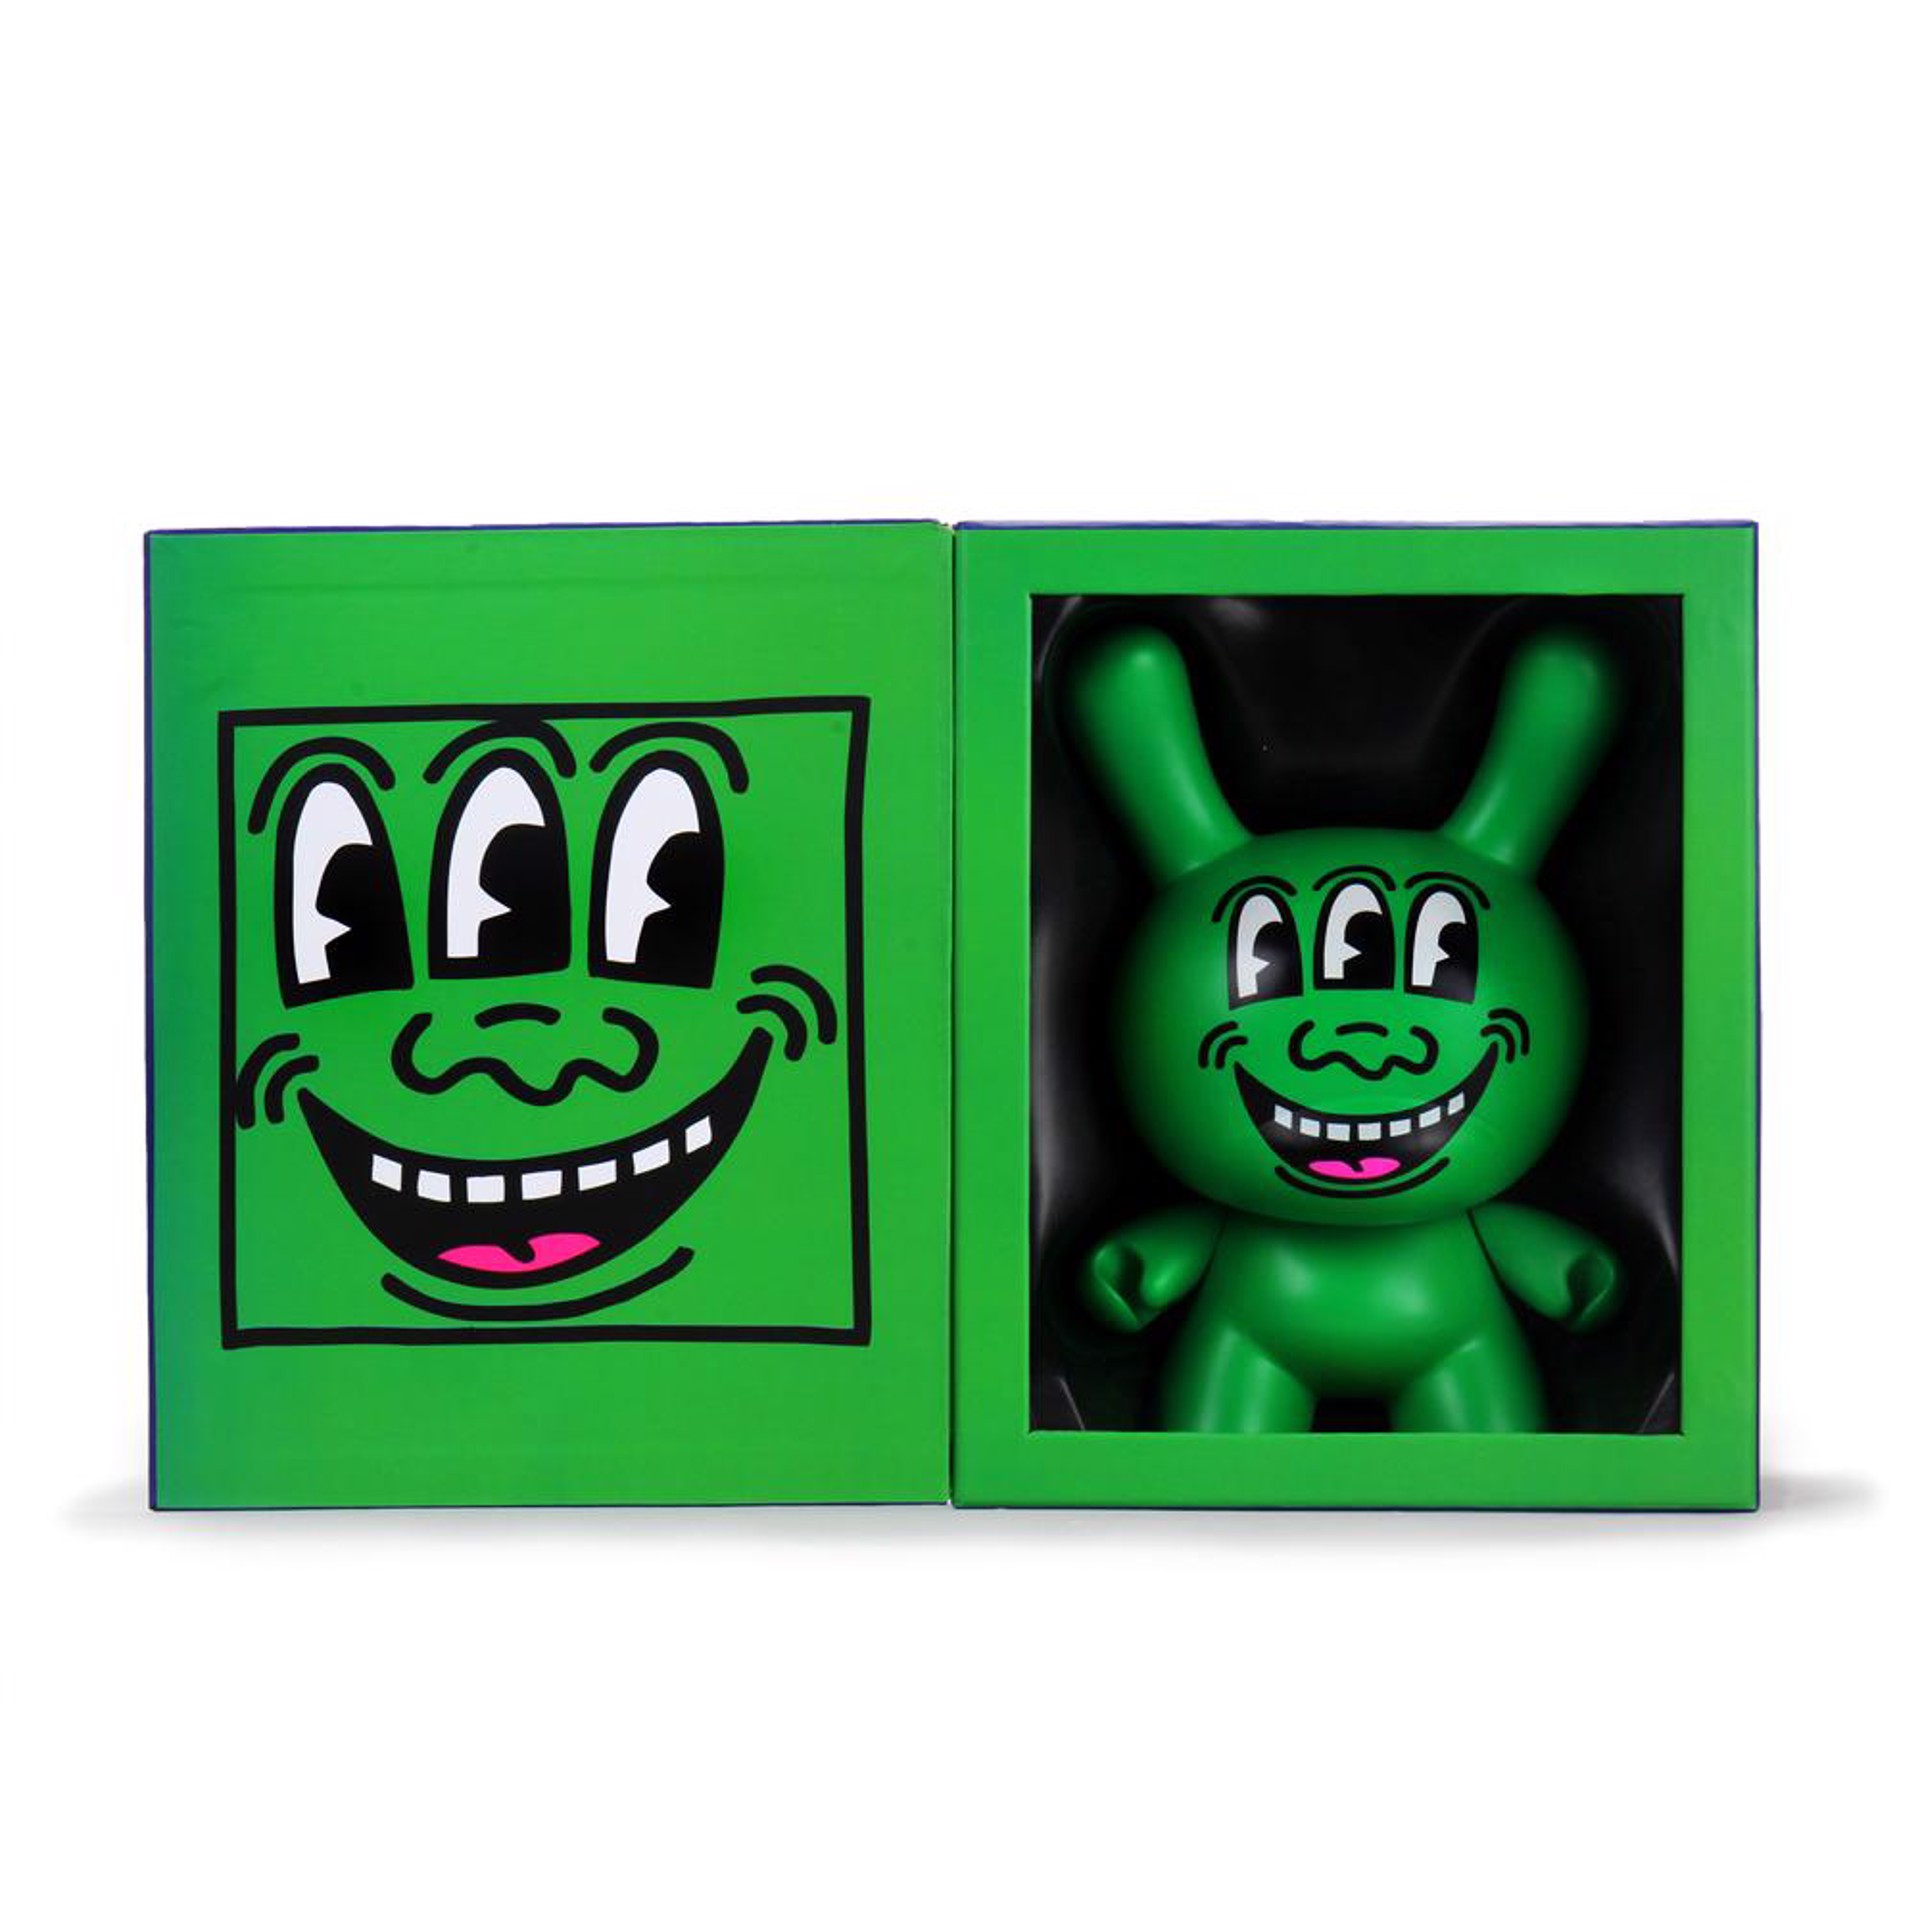 8” Keith Haring Masterpiece Dunny- Three Eyed Face by Keith Haring